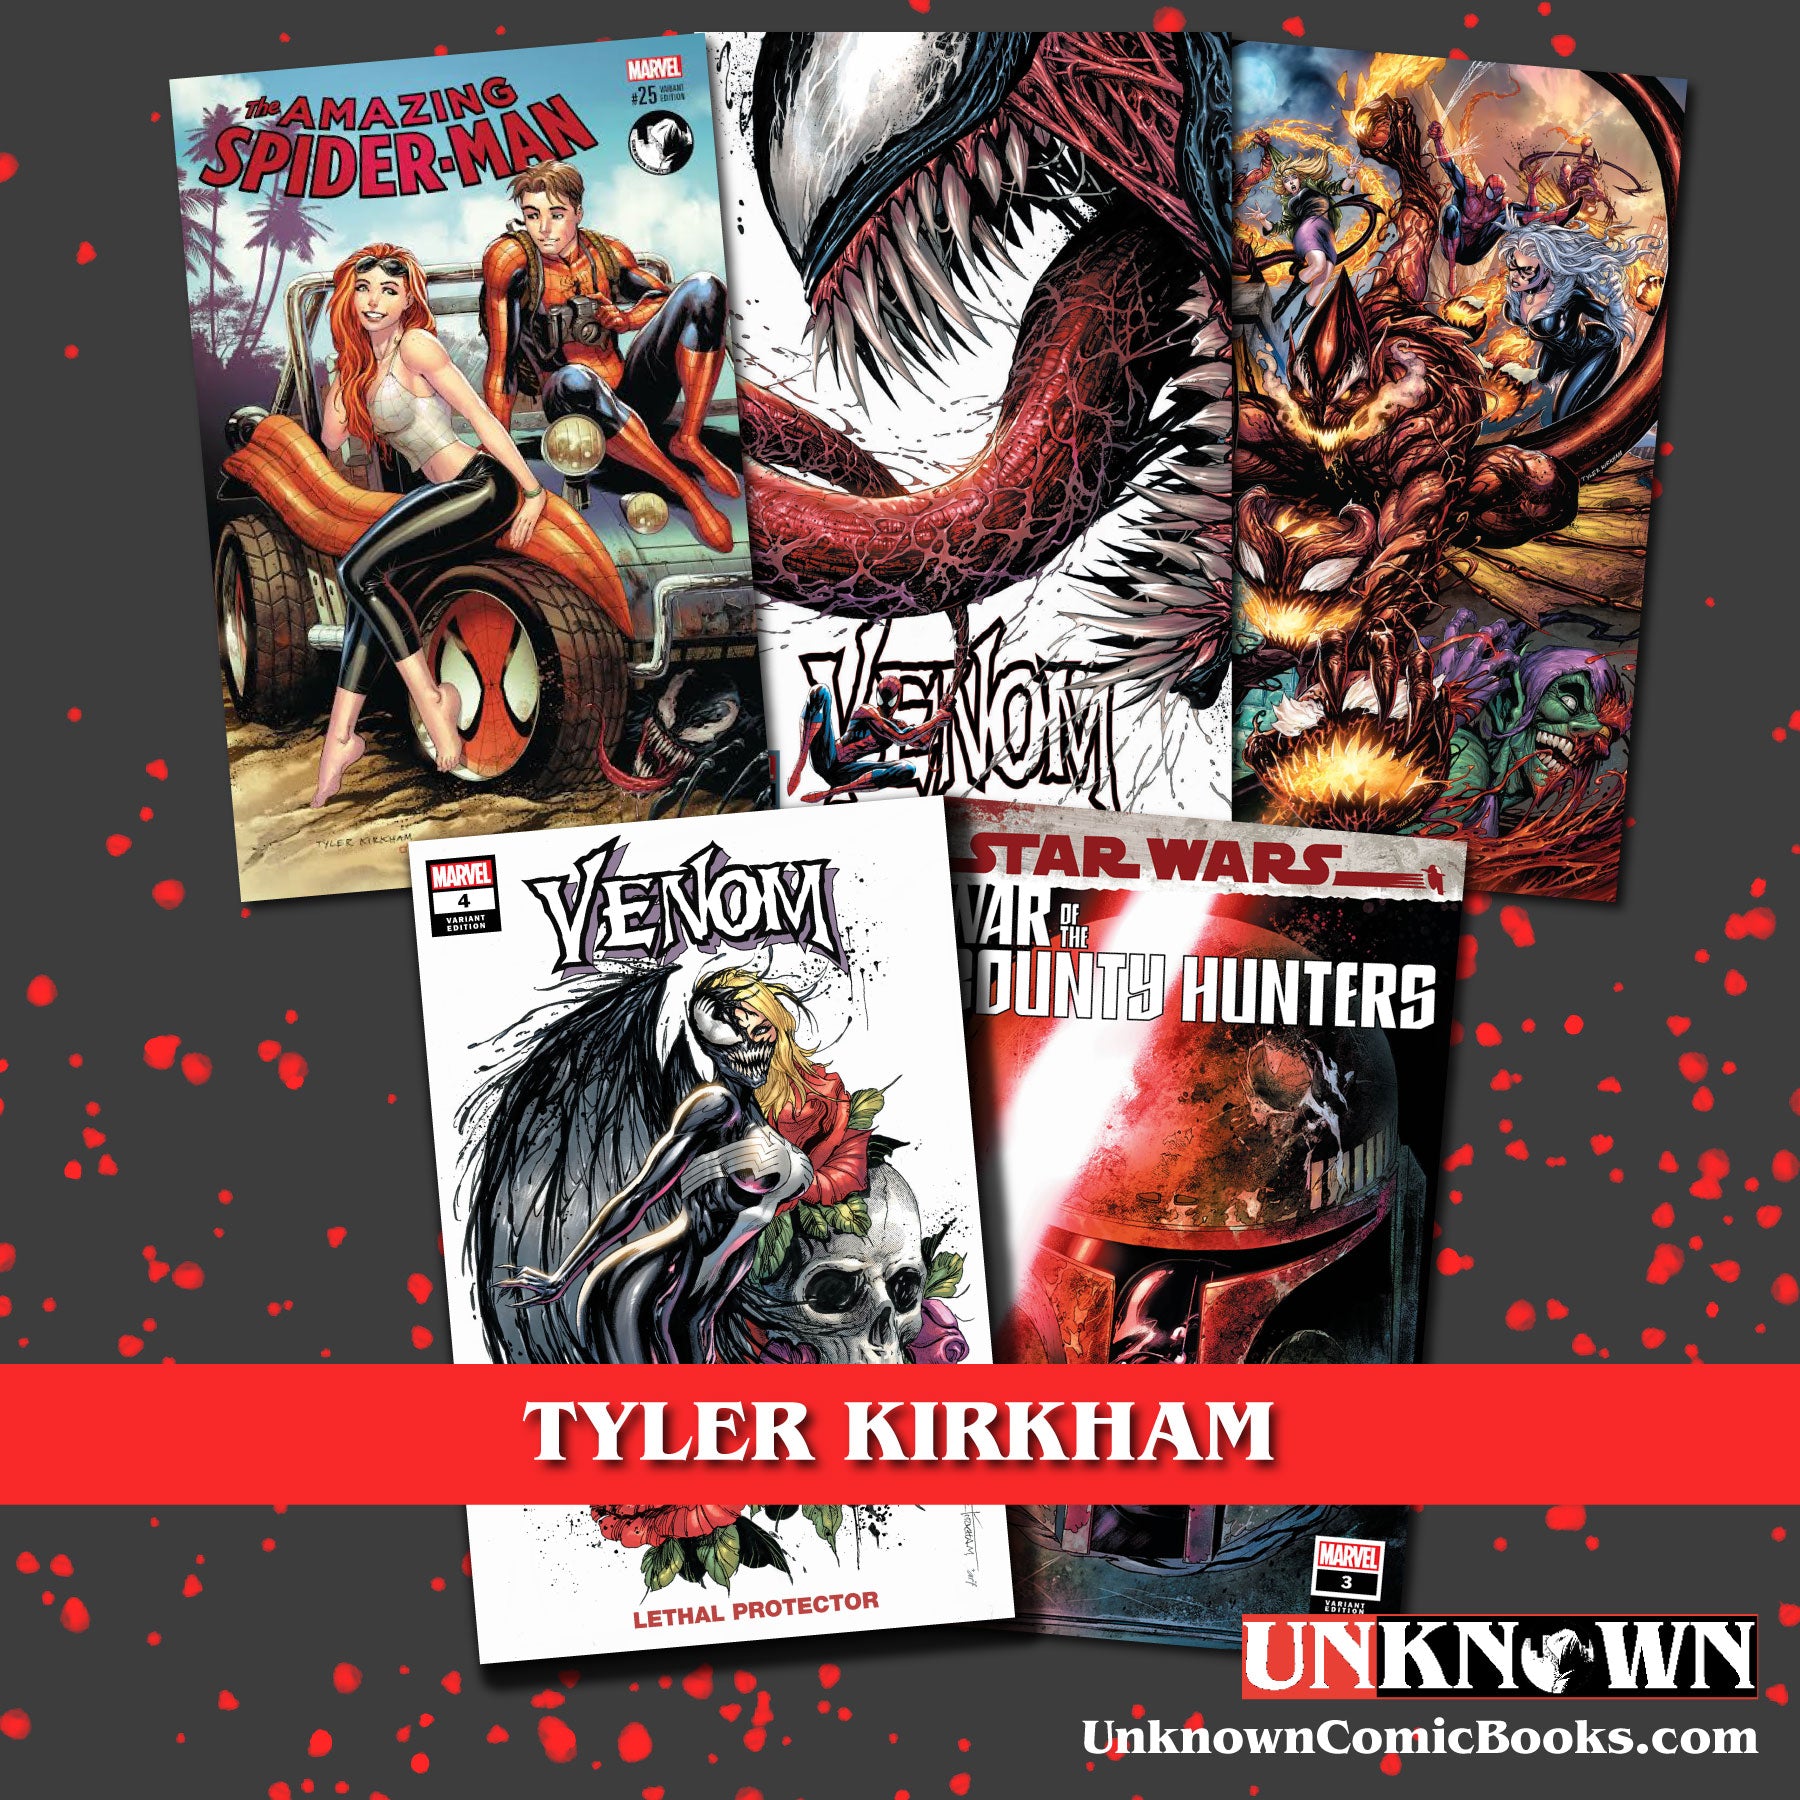 [5 PACK] UNKNOWN COMICS MYSTERY THEMED 👉🎨TYLER KIRKHAM ARTIST EXCLUSIVE BOX 👉TRADE (12/21/2022)